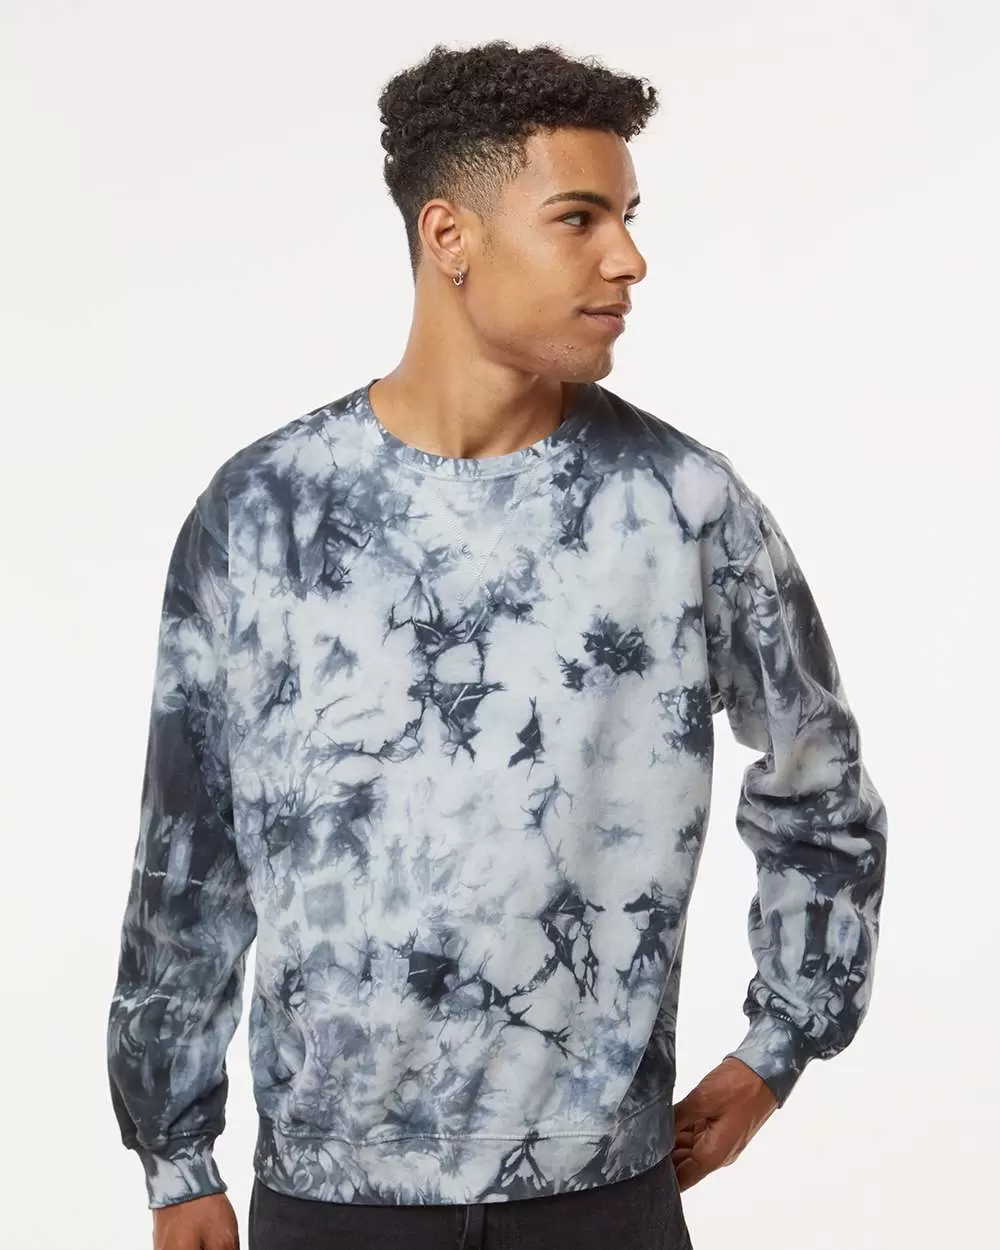 Dyenomite 681VR Blended Tie-Dyed Sweatshirt - From $20.78